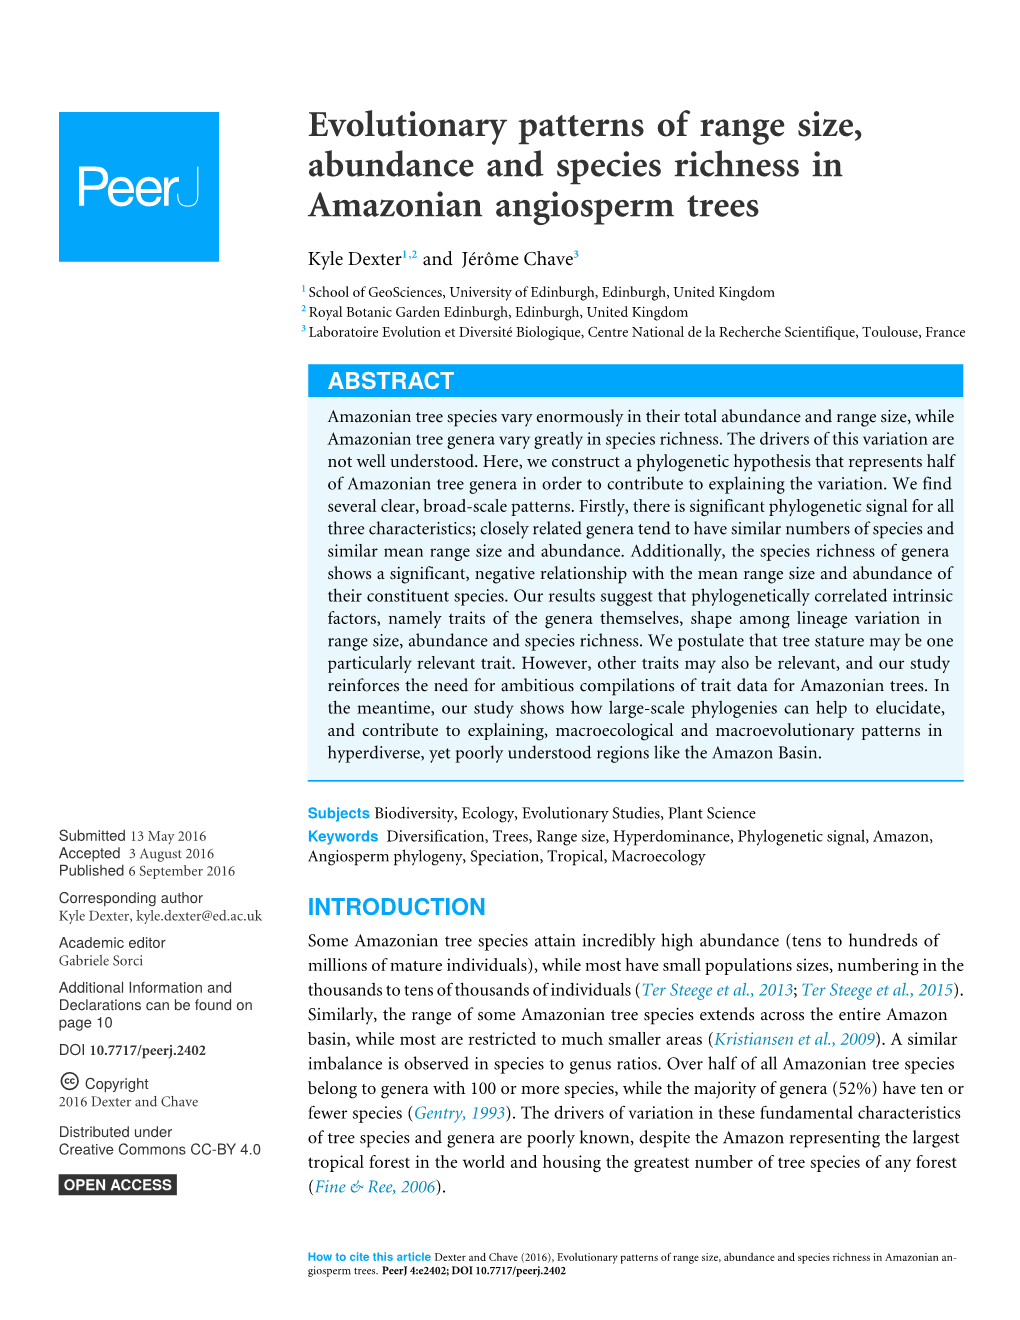 Evolutionary Patterns of Range Size, Abundance and Species Richness in Amazonian Angiosperm Trees